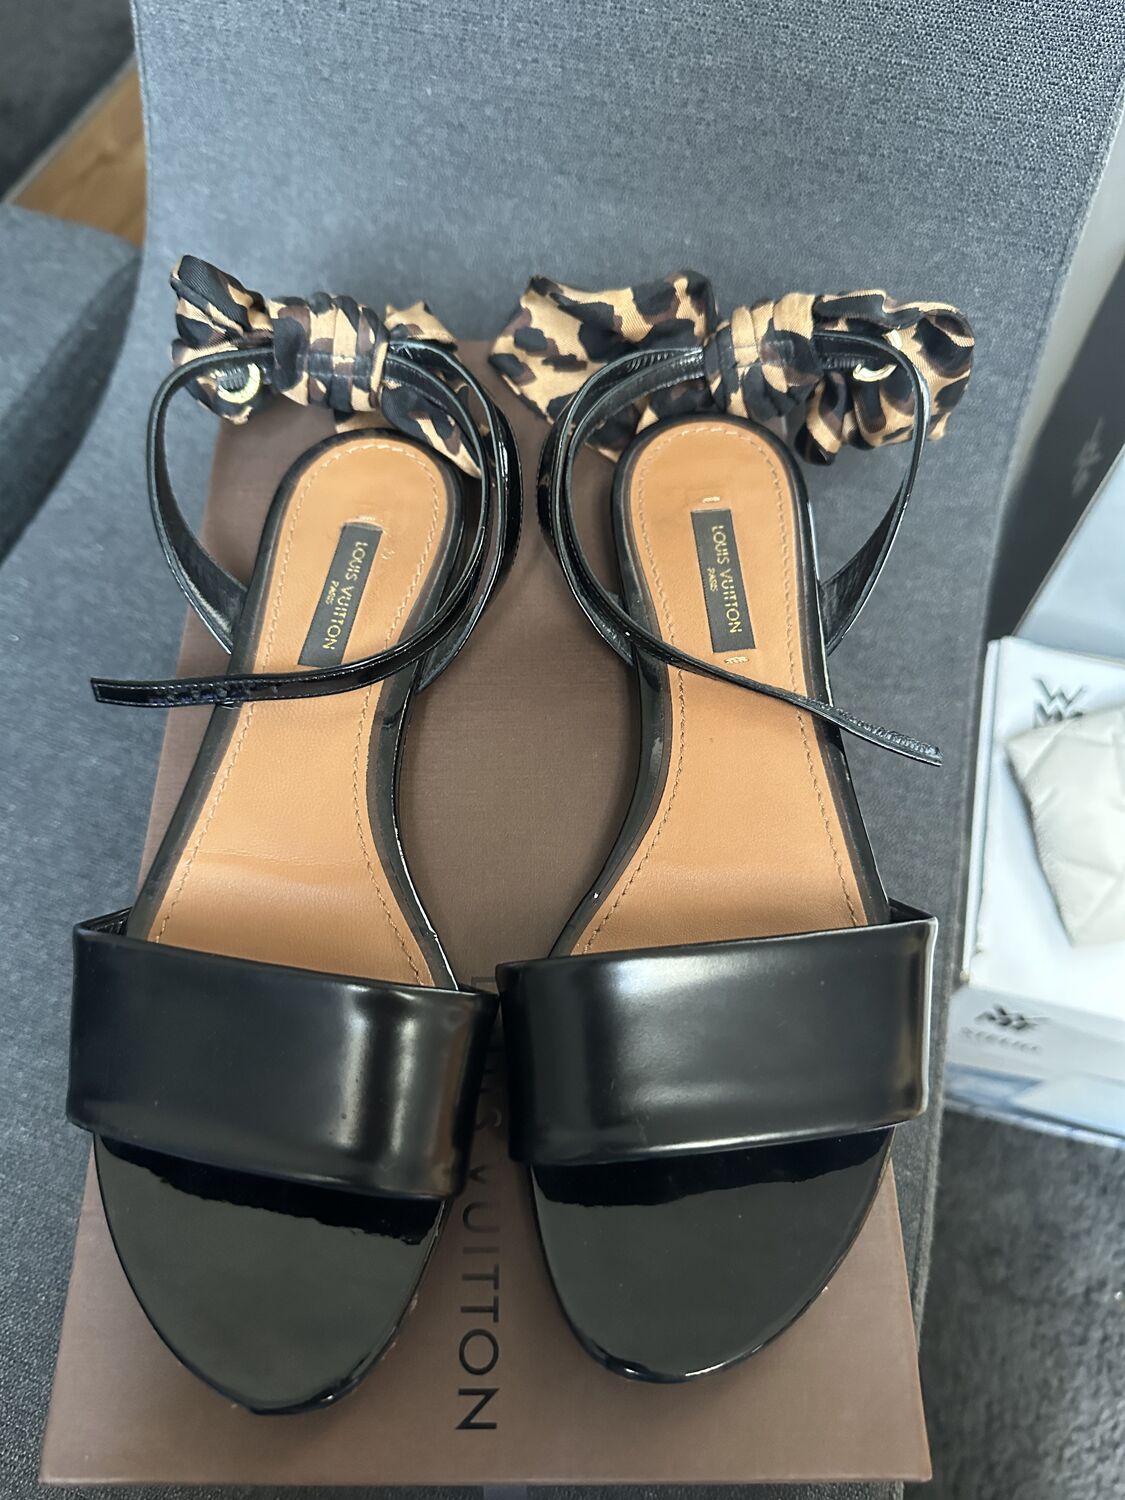 Leather Flat Sandals Louis Vuitton - 37, pre-owned at 400 EUR